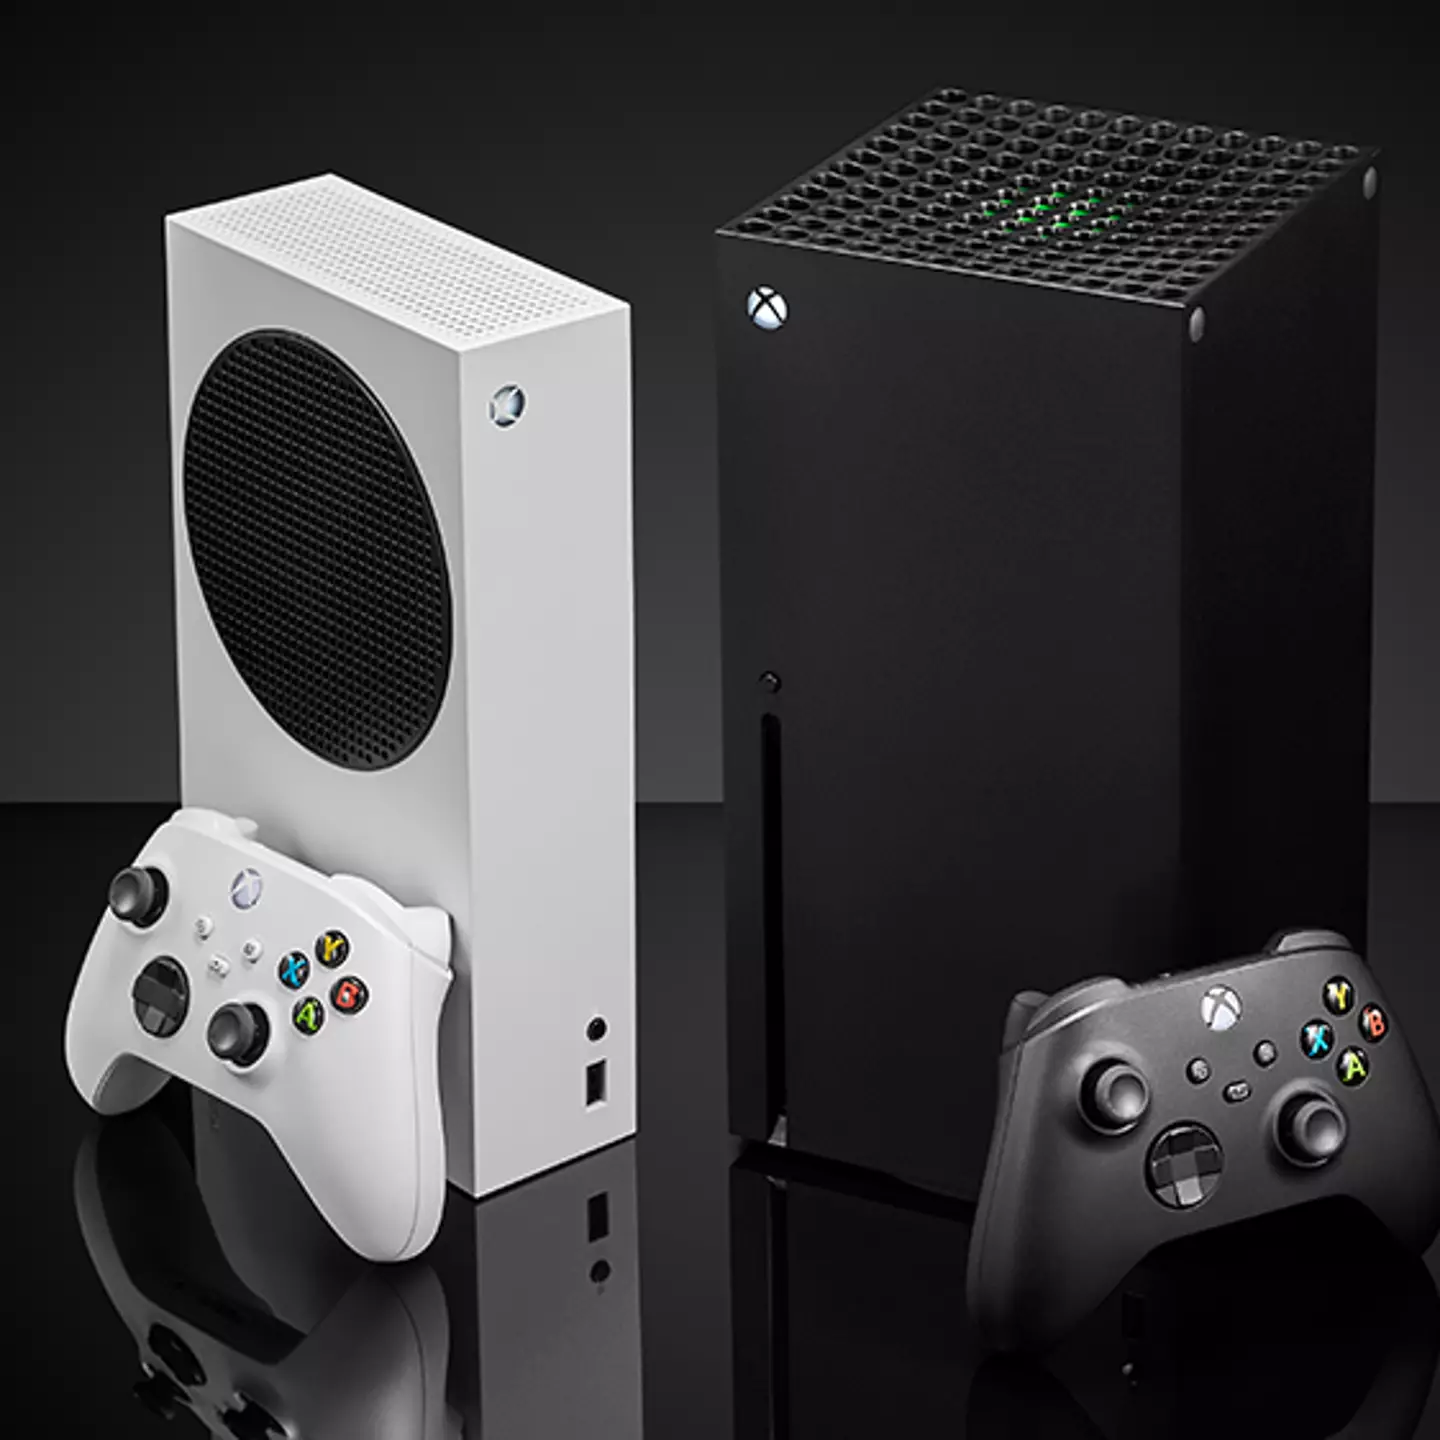 Free Xbox consoles are available this week and there’s an easy way to claim yours